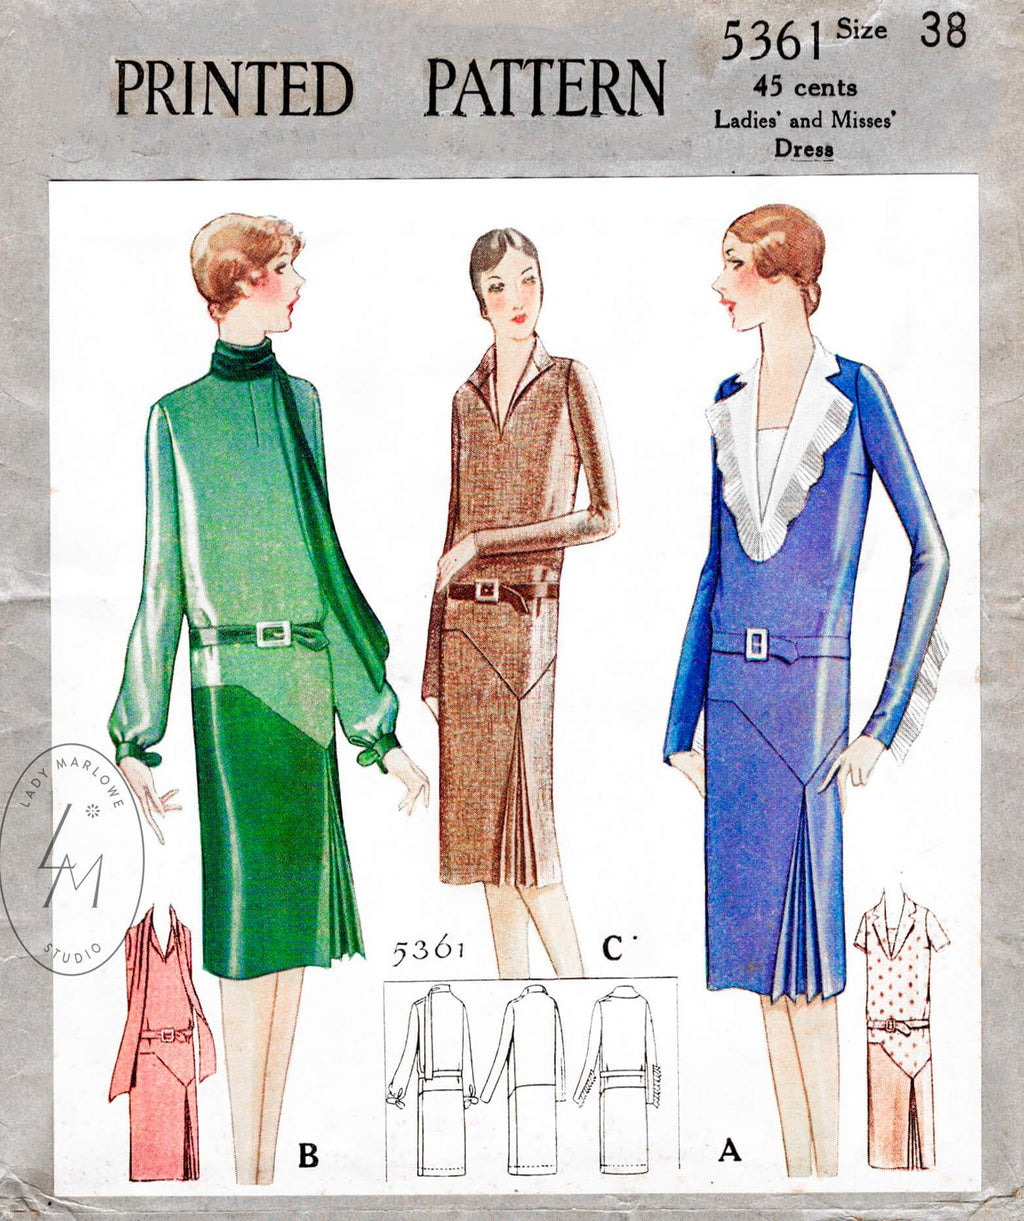 McCall 5361 1920s 1928 scarf collar art deco vintage dress sewing pattern reproduction